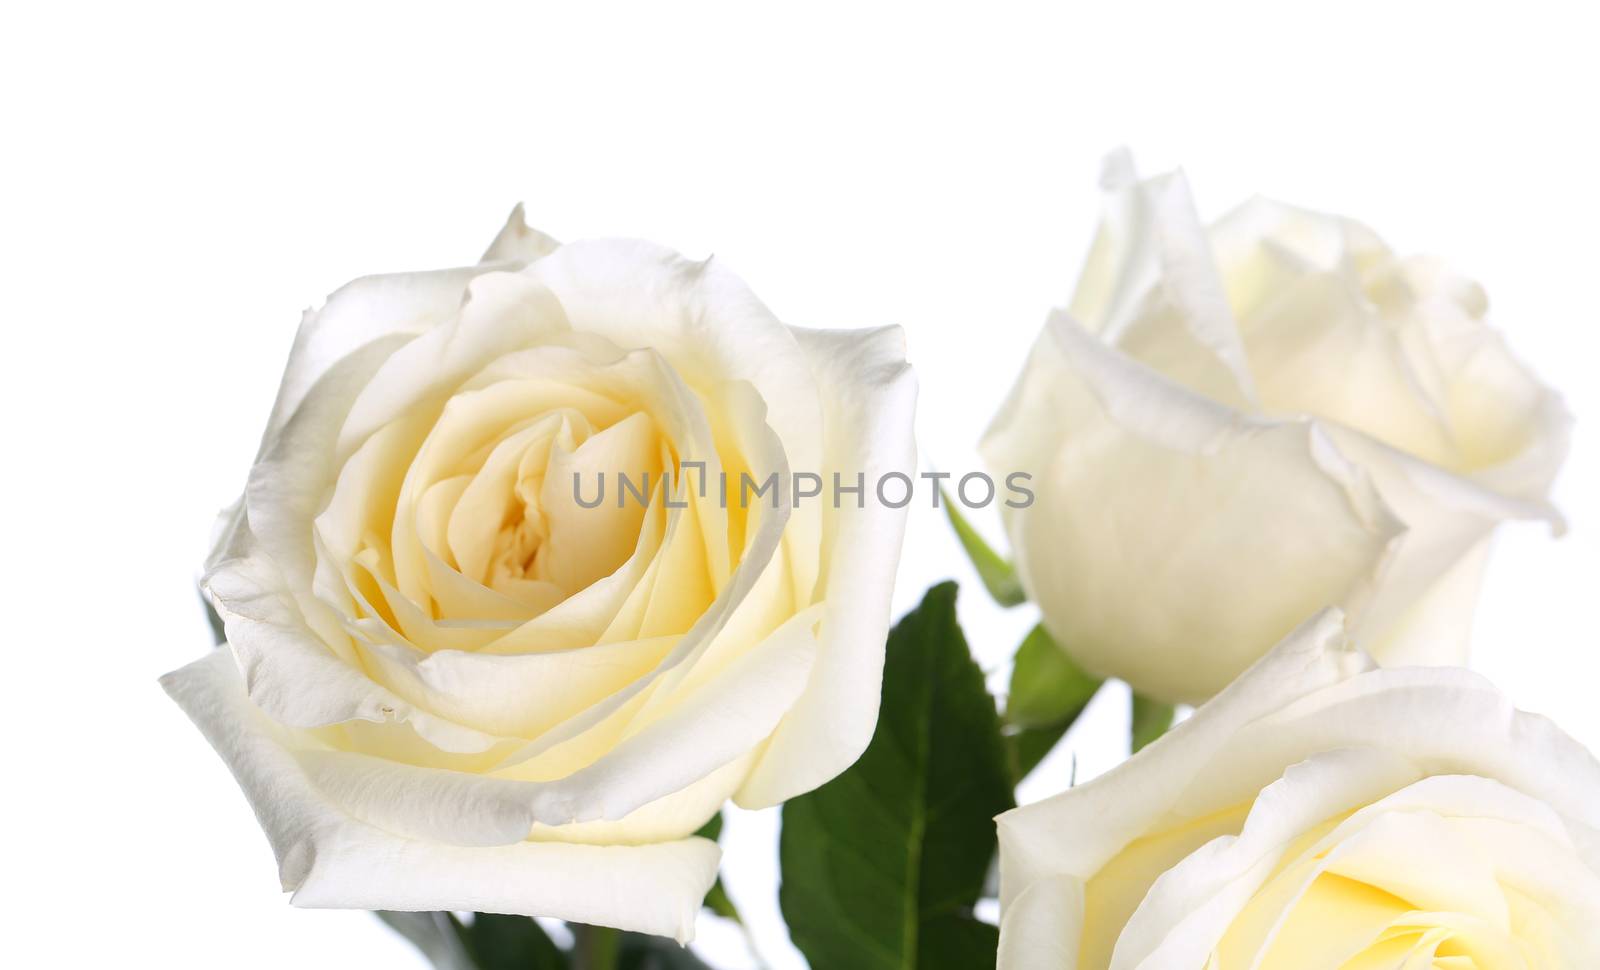 Roses on a white background by indigolotos